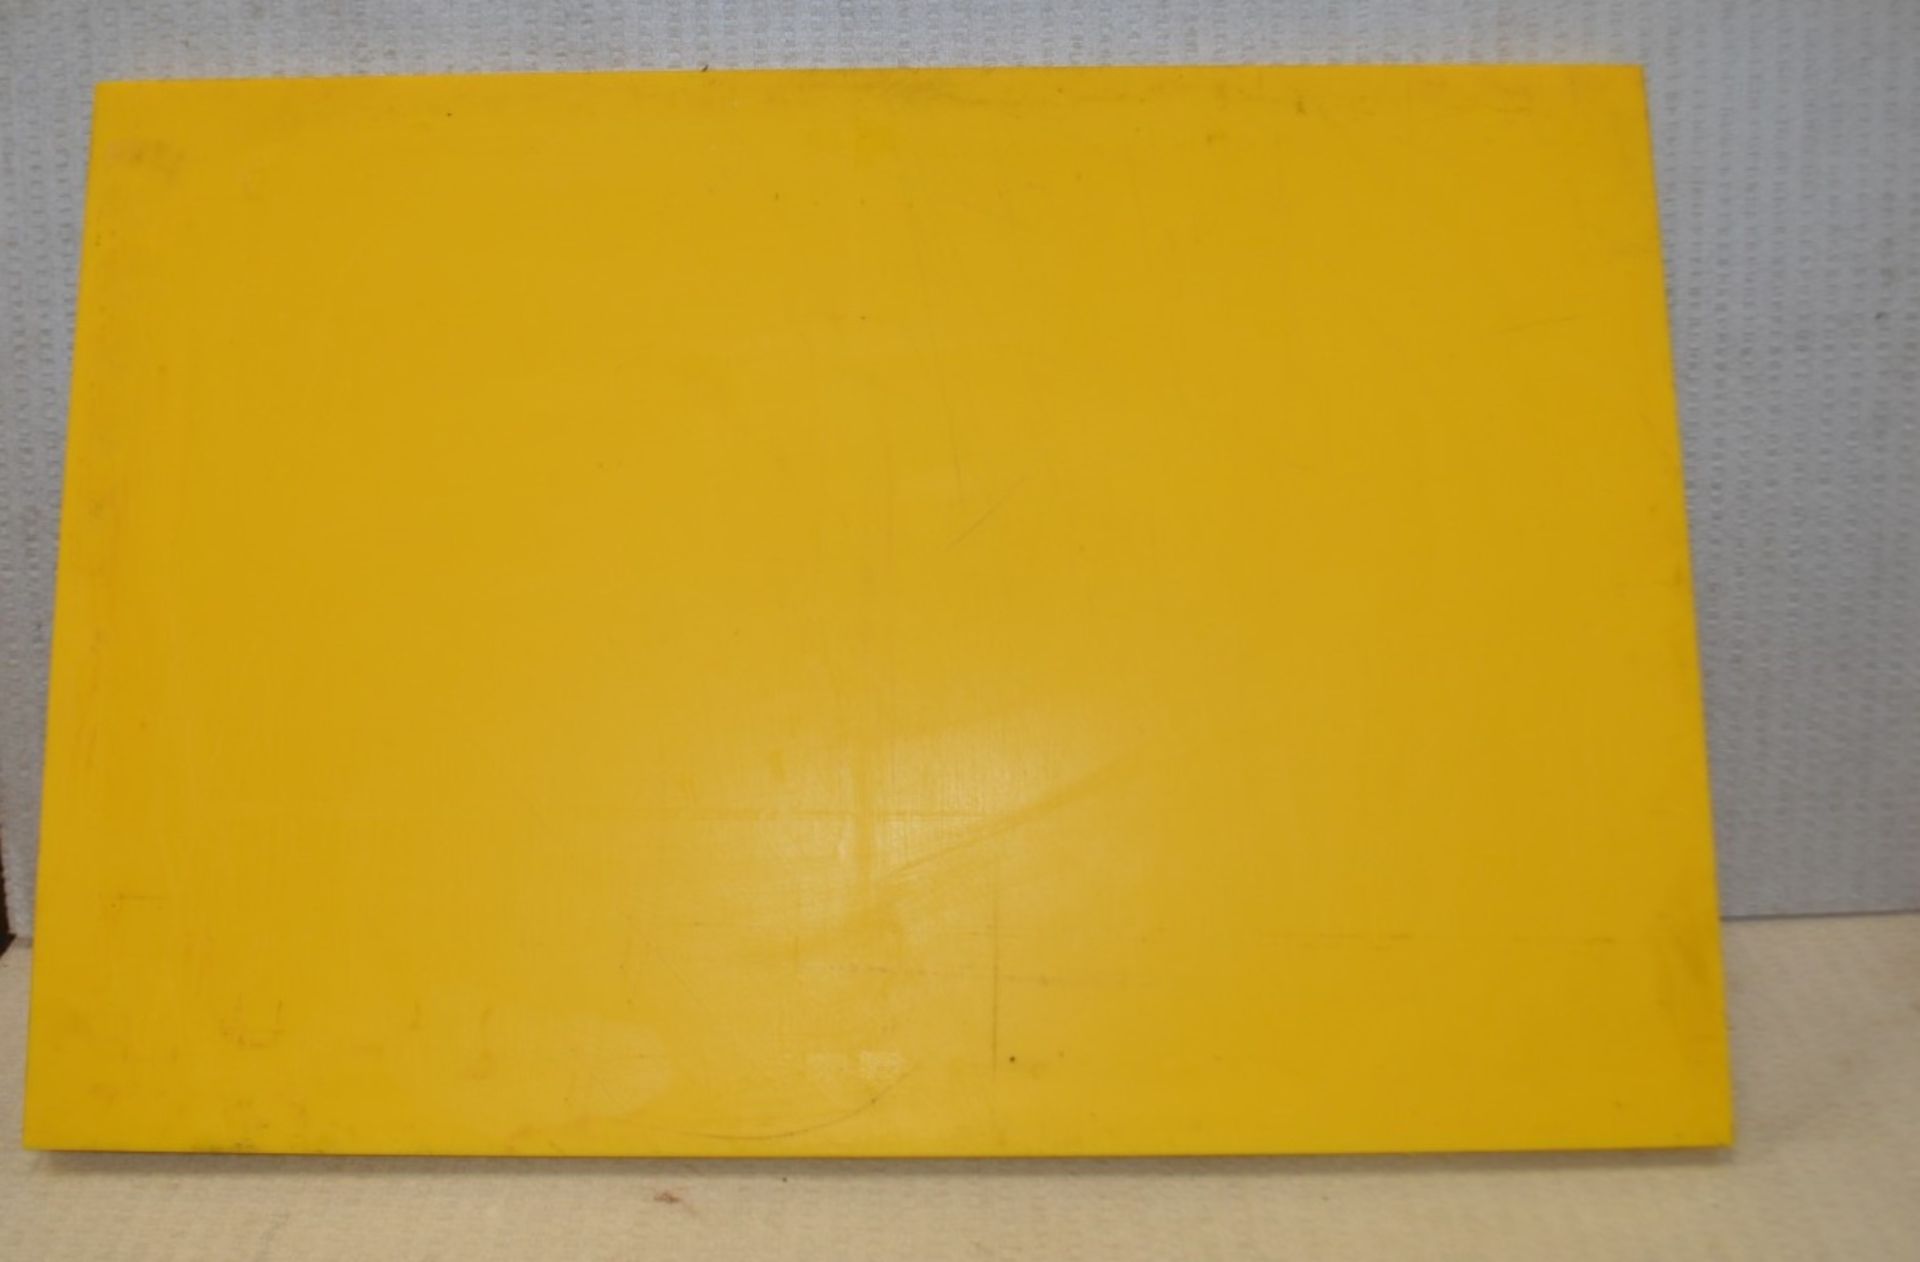 1 x Large Commercial Chopping / Preparation Board - Hygenic and Colour Coded Yellow - Dimensions: